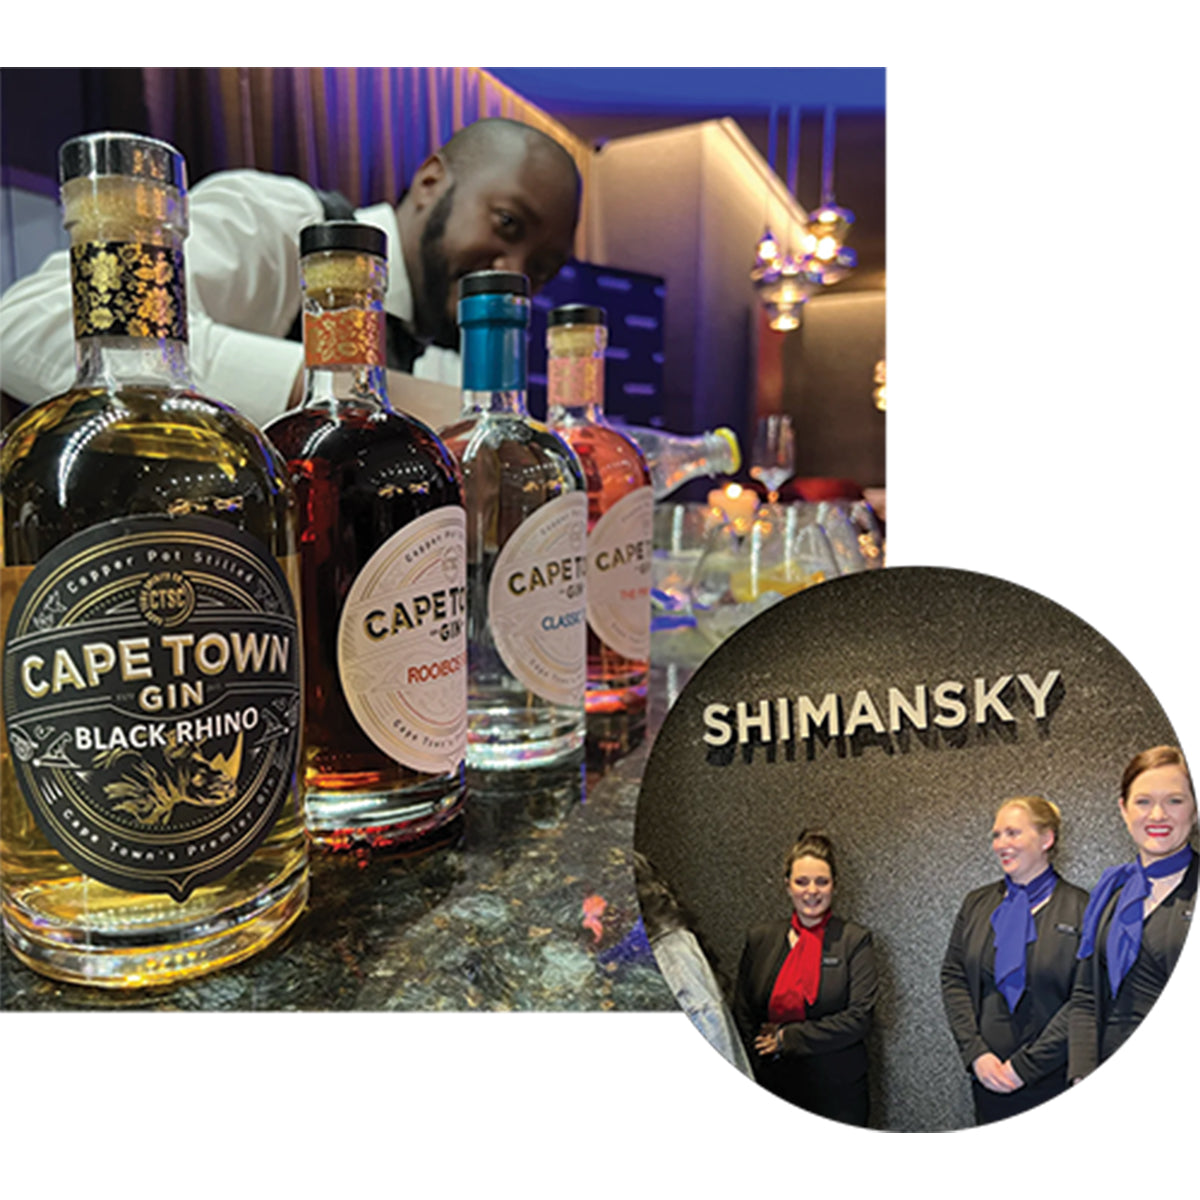 Shimansky Barman pouring luxury local Cape Town gins